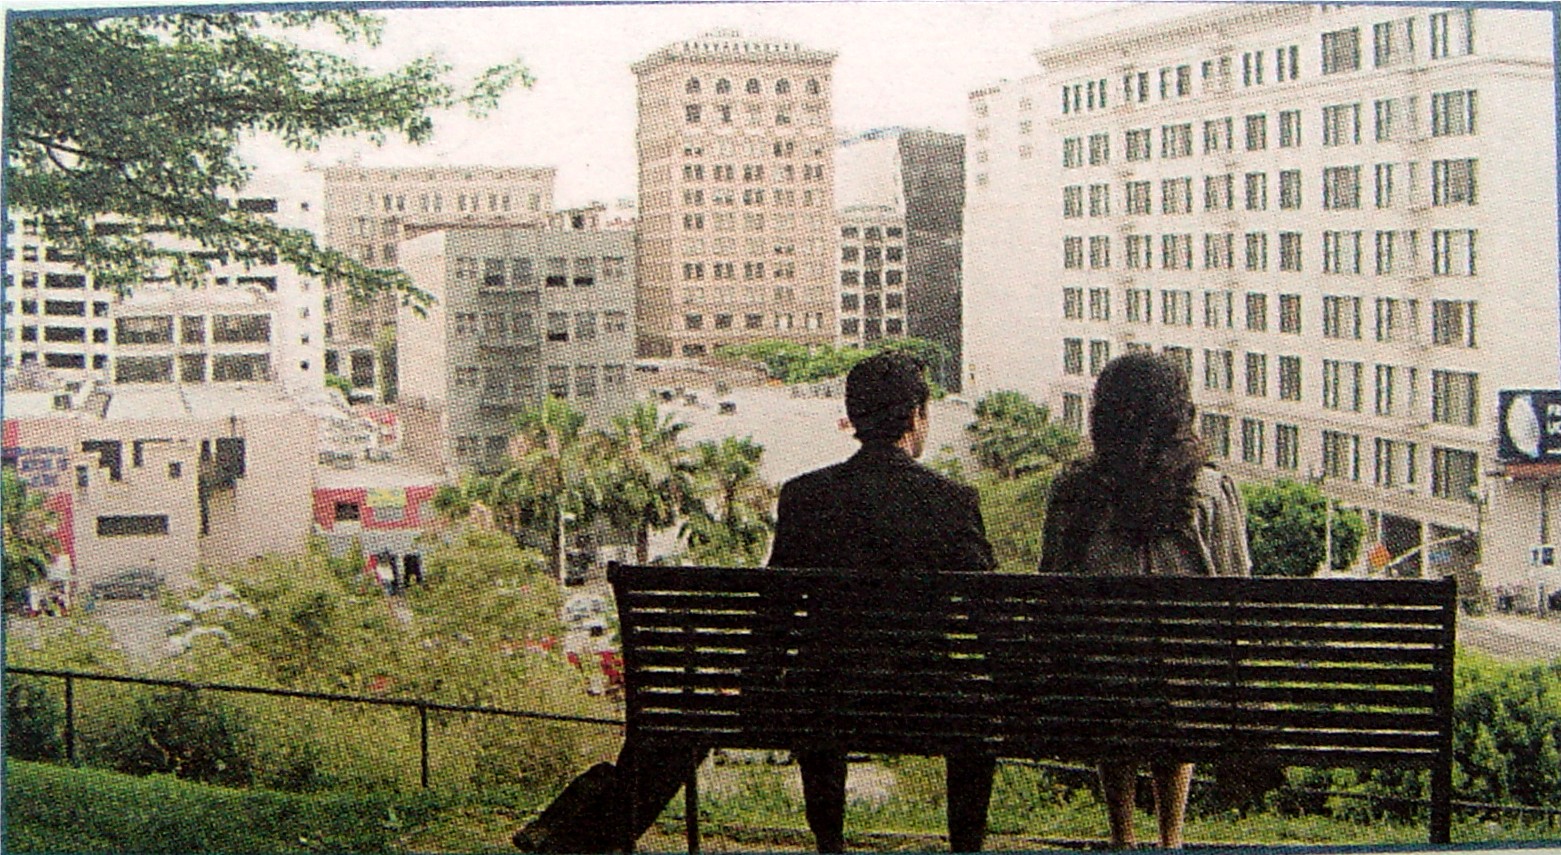 (500) Days of Summer movies in Canada